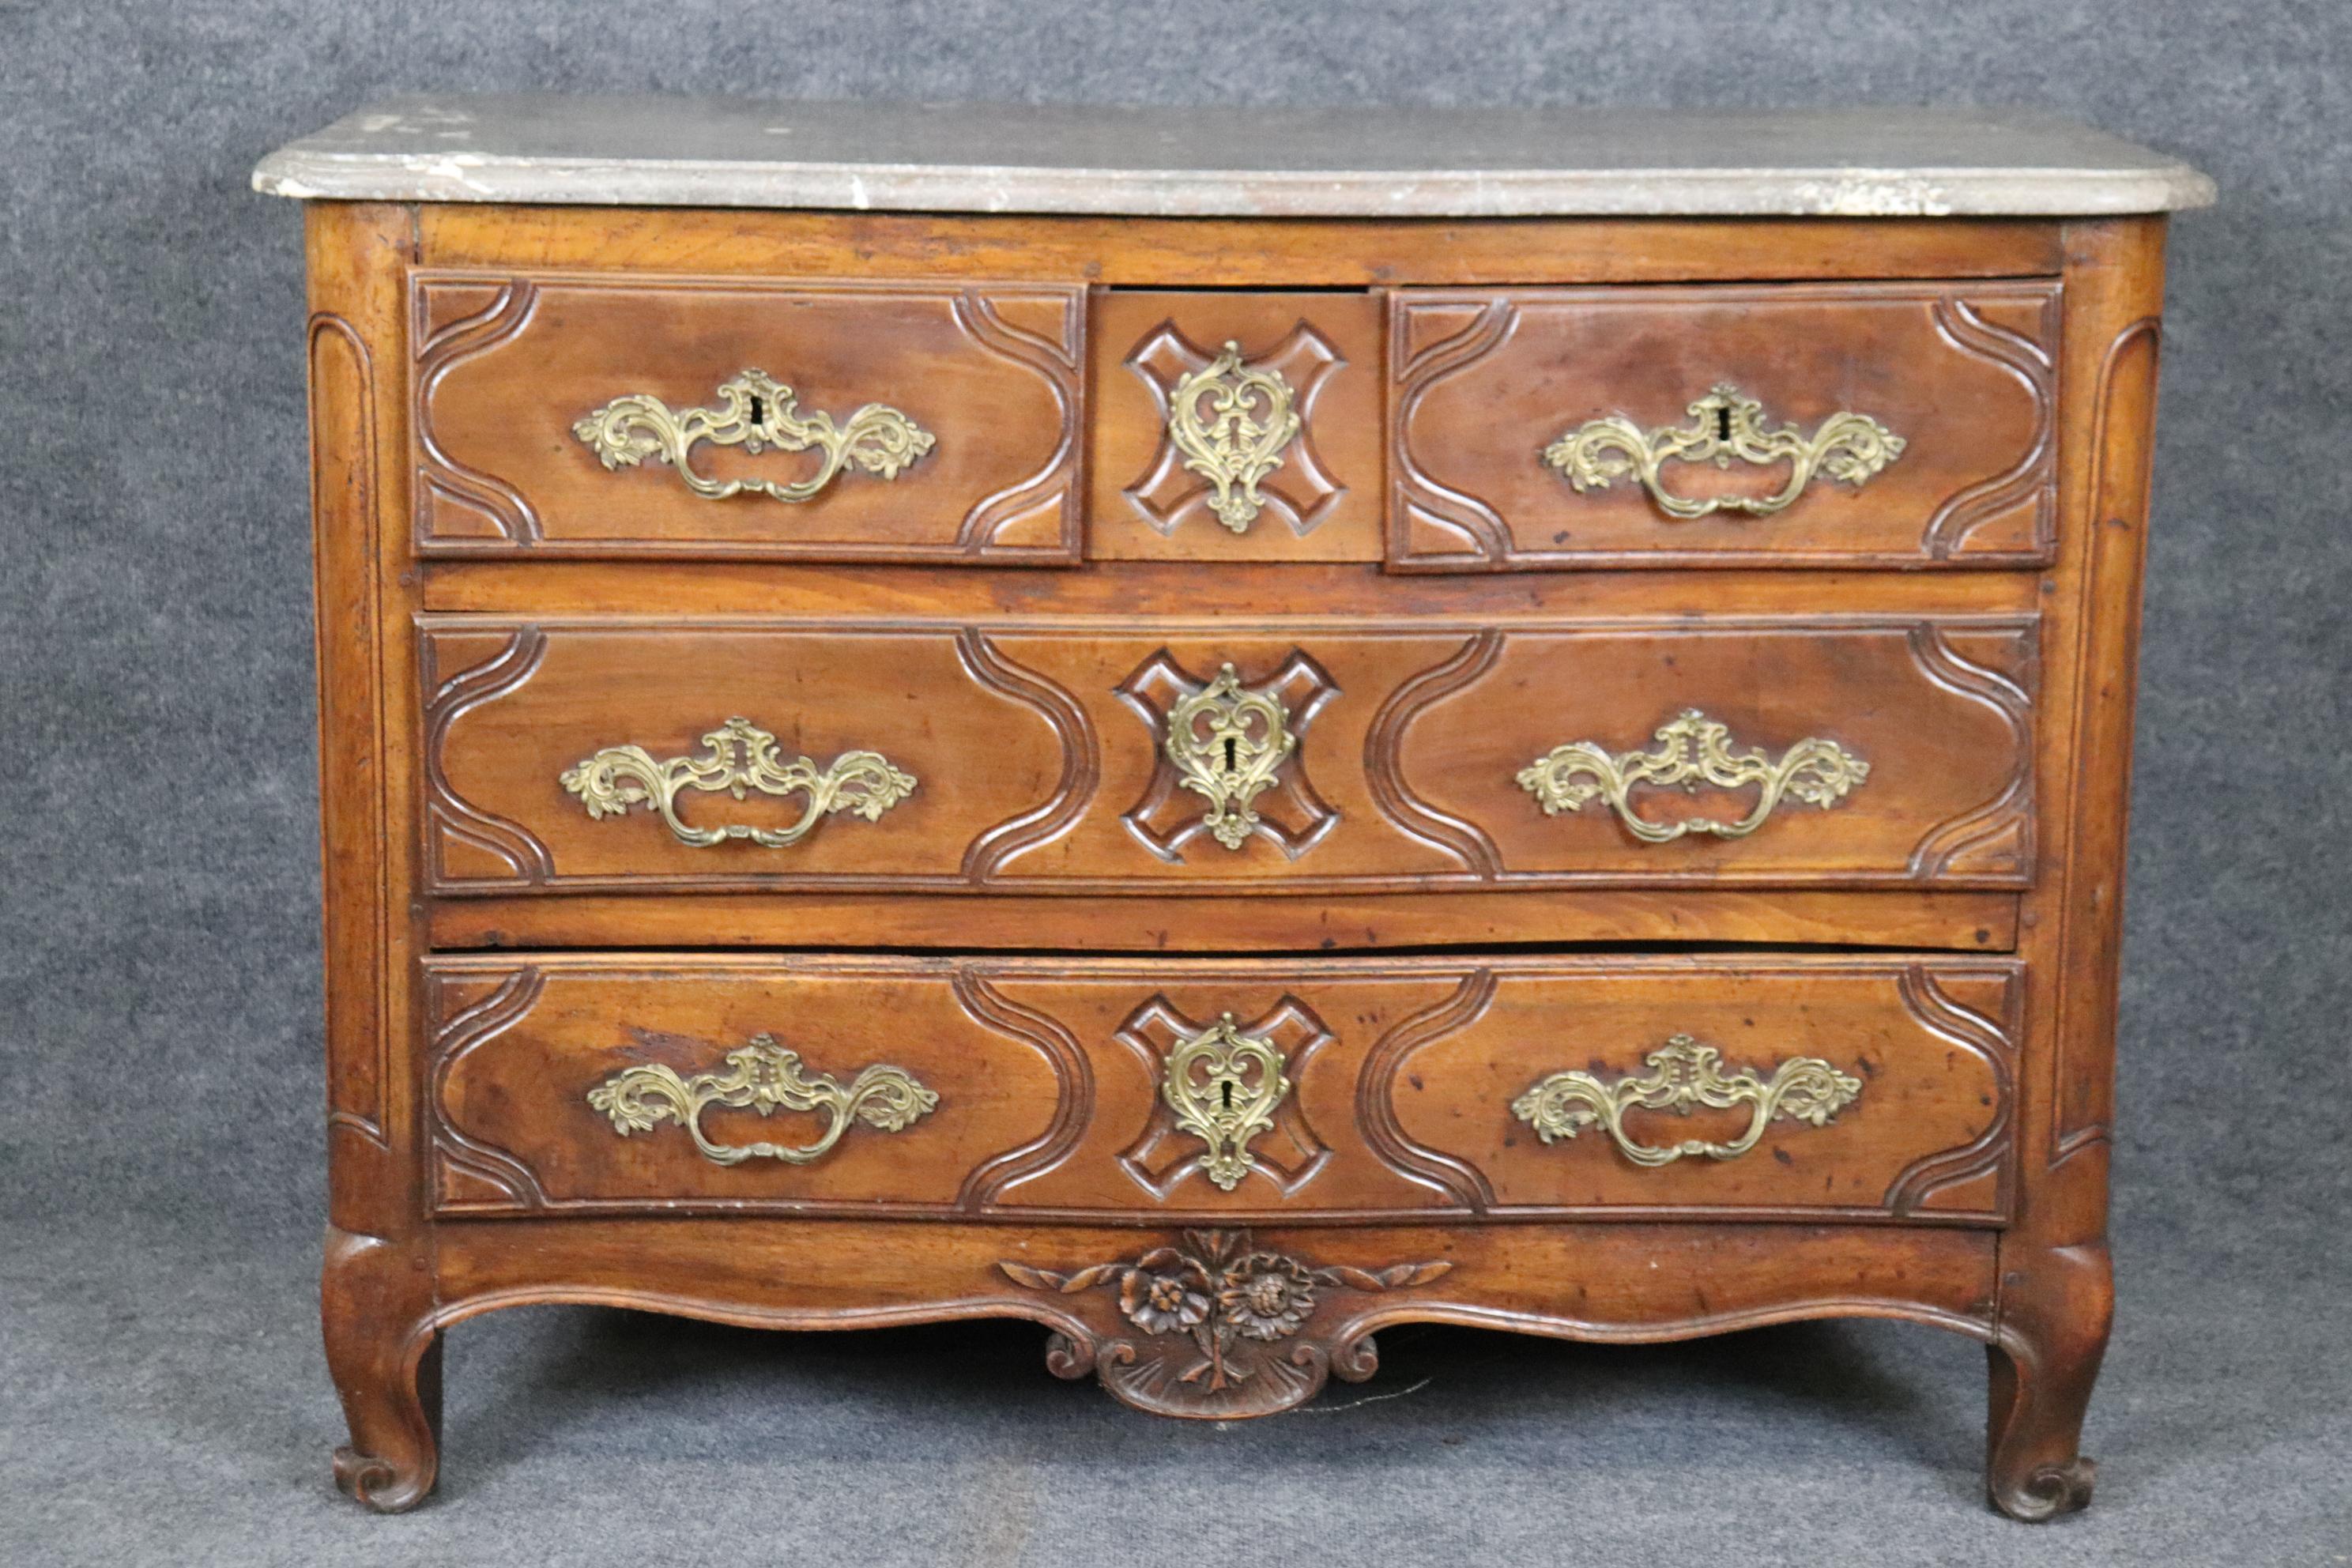 Period French Louis XV Walnut Marble Top Bronze Mounted Commode For Sale 4